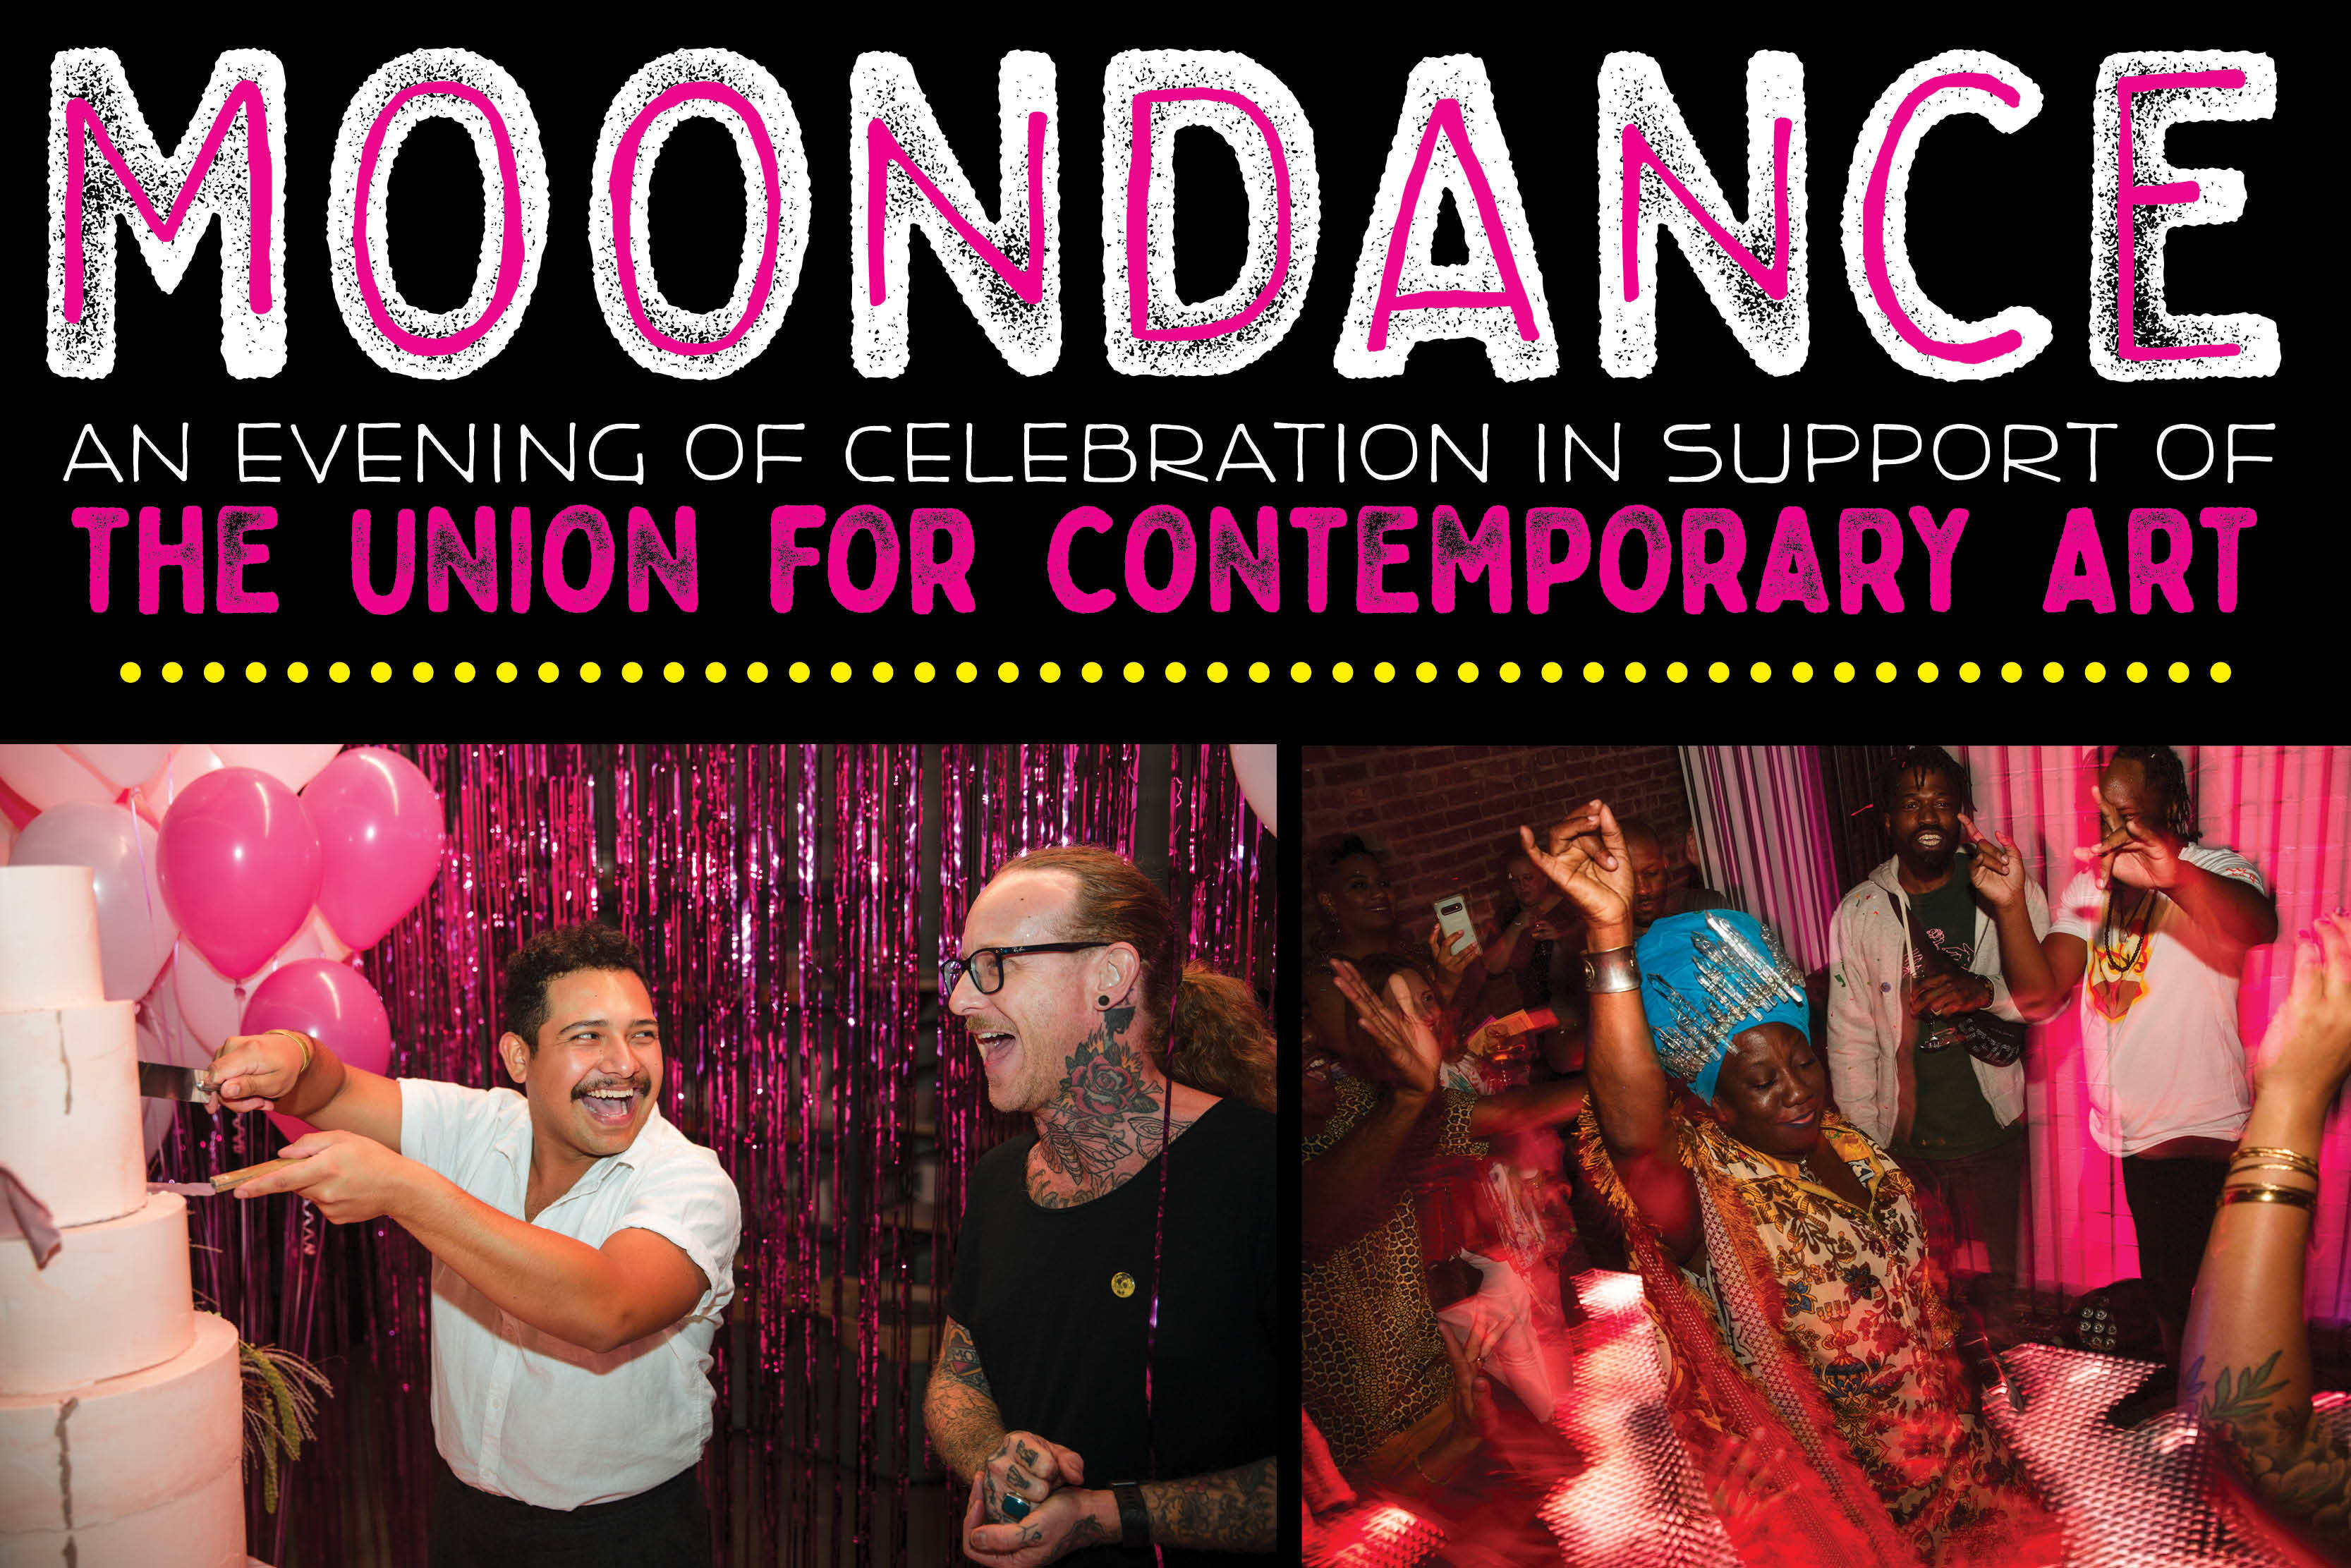 Moondance Happenings An evening of celebration in support of The Union for Contemporary Art Photos of people dancing and cutting cake at the 2019 moondance